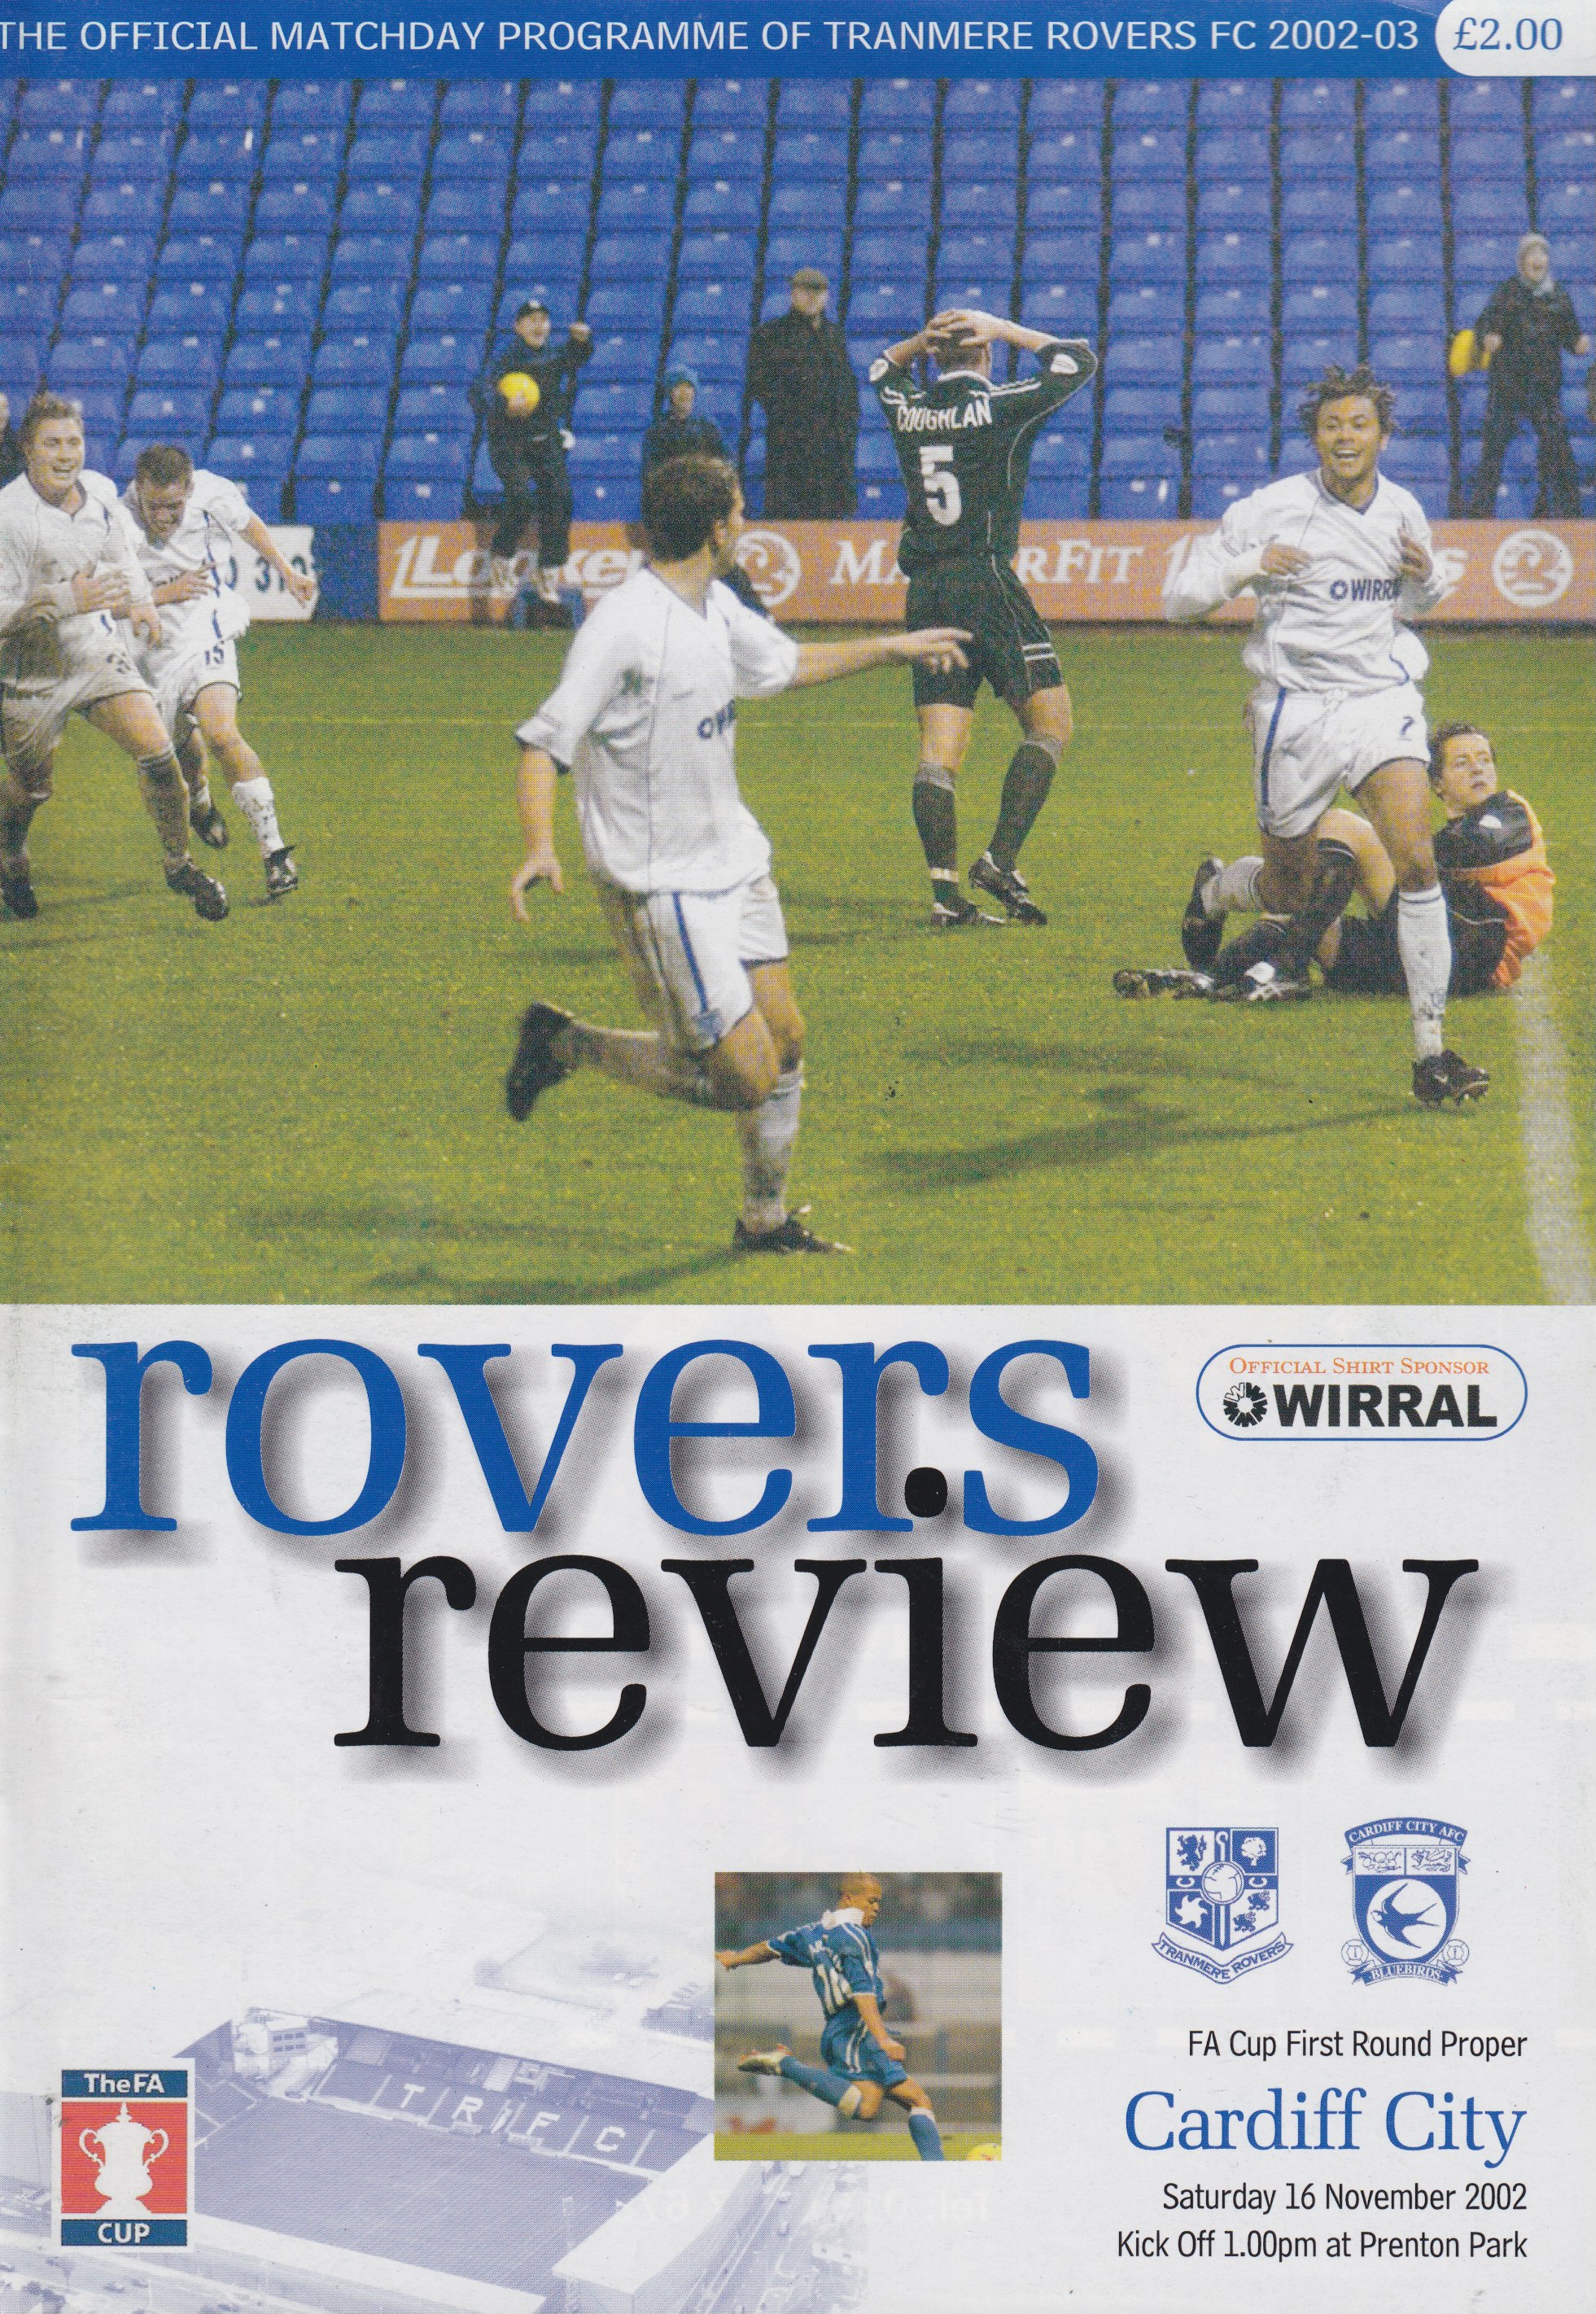 Match Programme For {home}} 2-2 Cardiff City, FA Cup, 2002-11-16